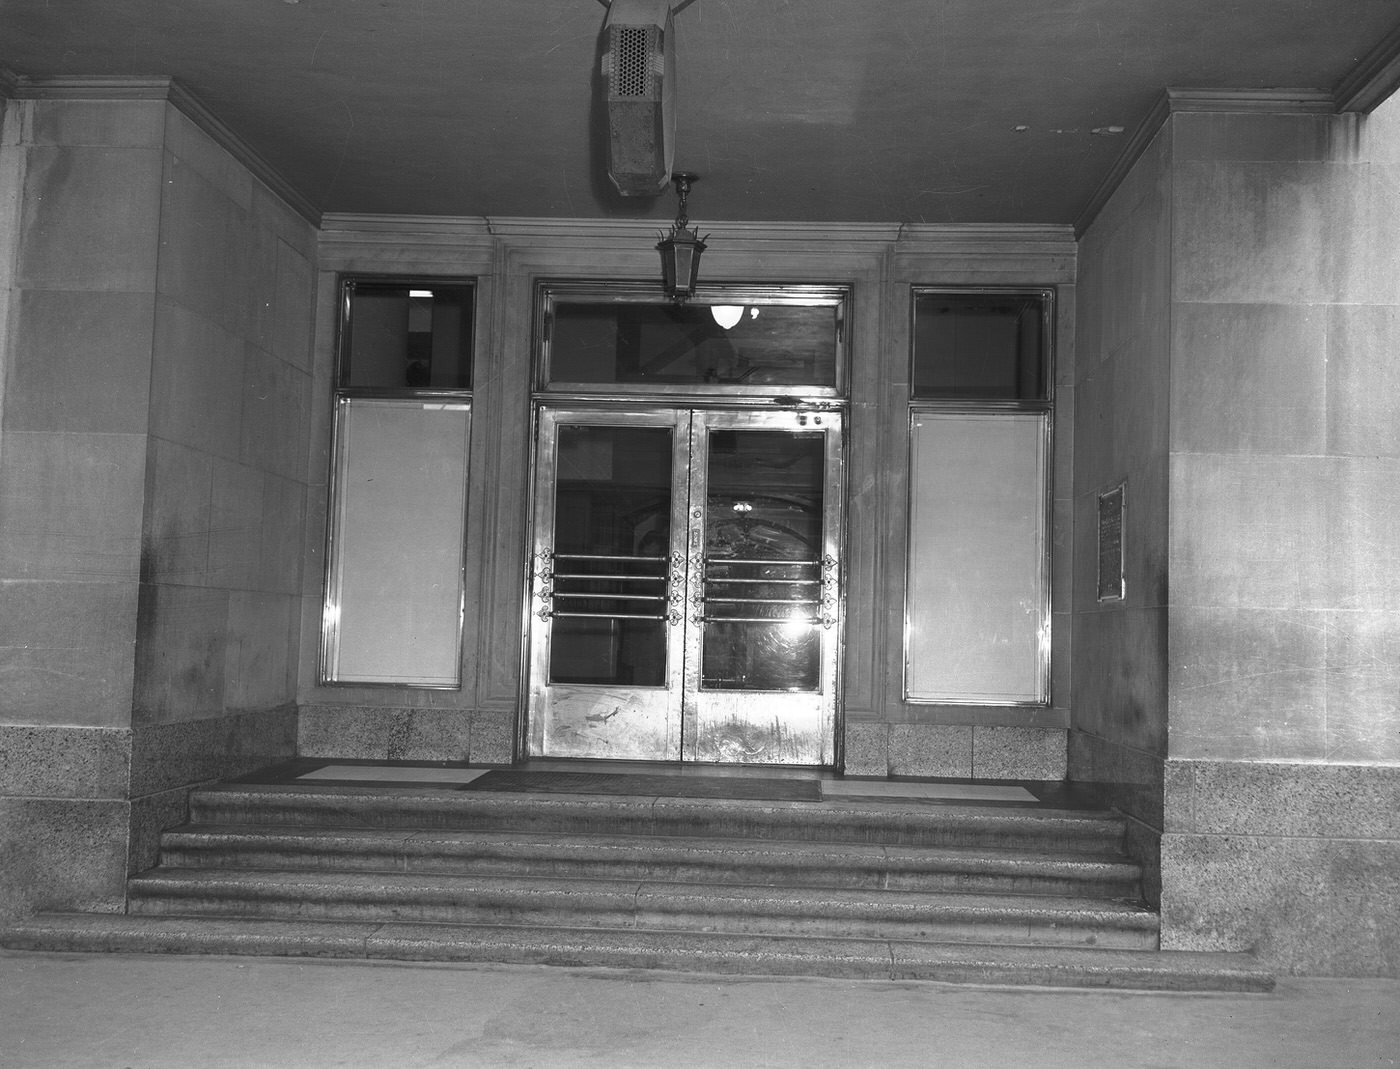 Entrance to Star-Telegram building on 7th St., Fort Worth, 1948